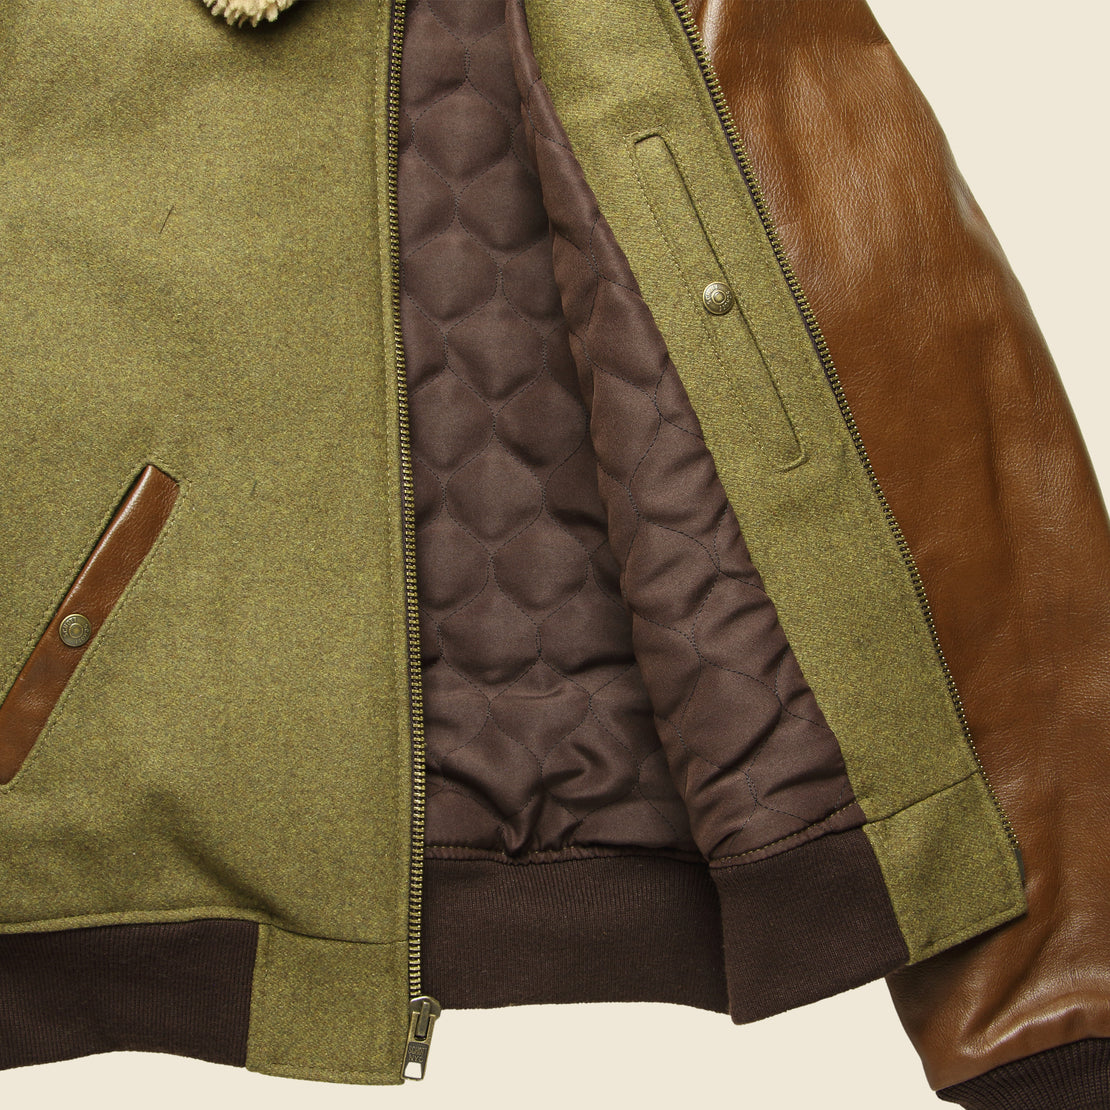 B-15 Wool Jacket - Olive - Schott - STAG Provisions - Outerwear - Coat / Jacket